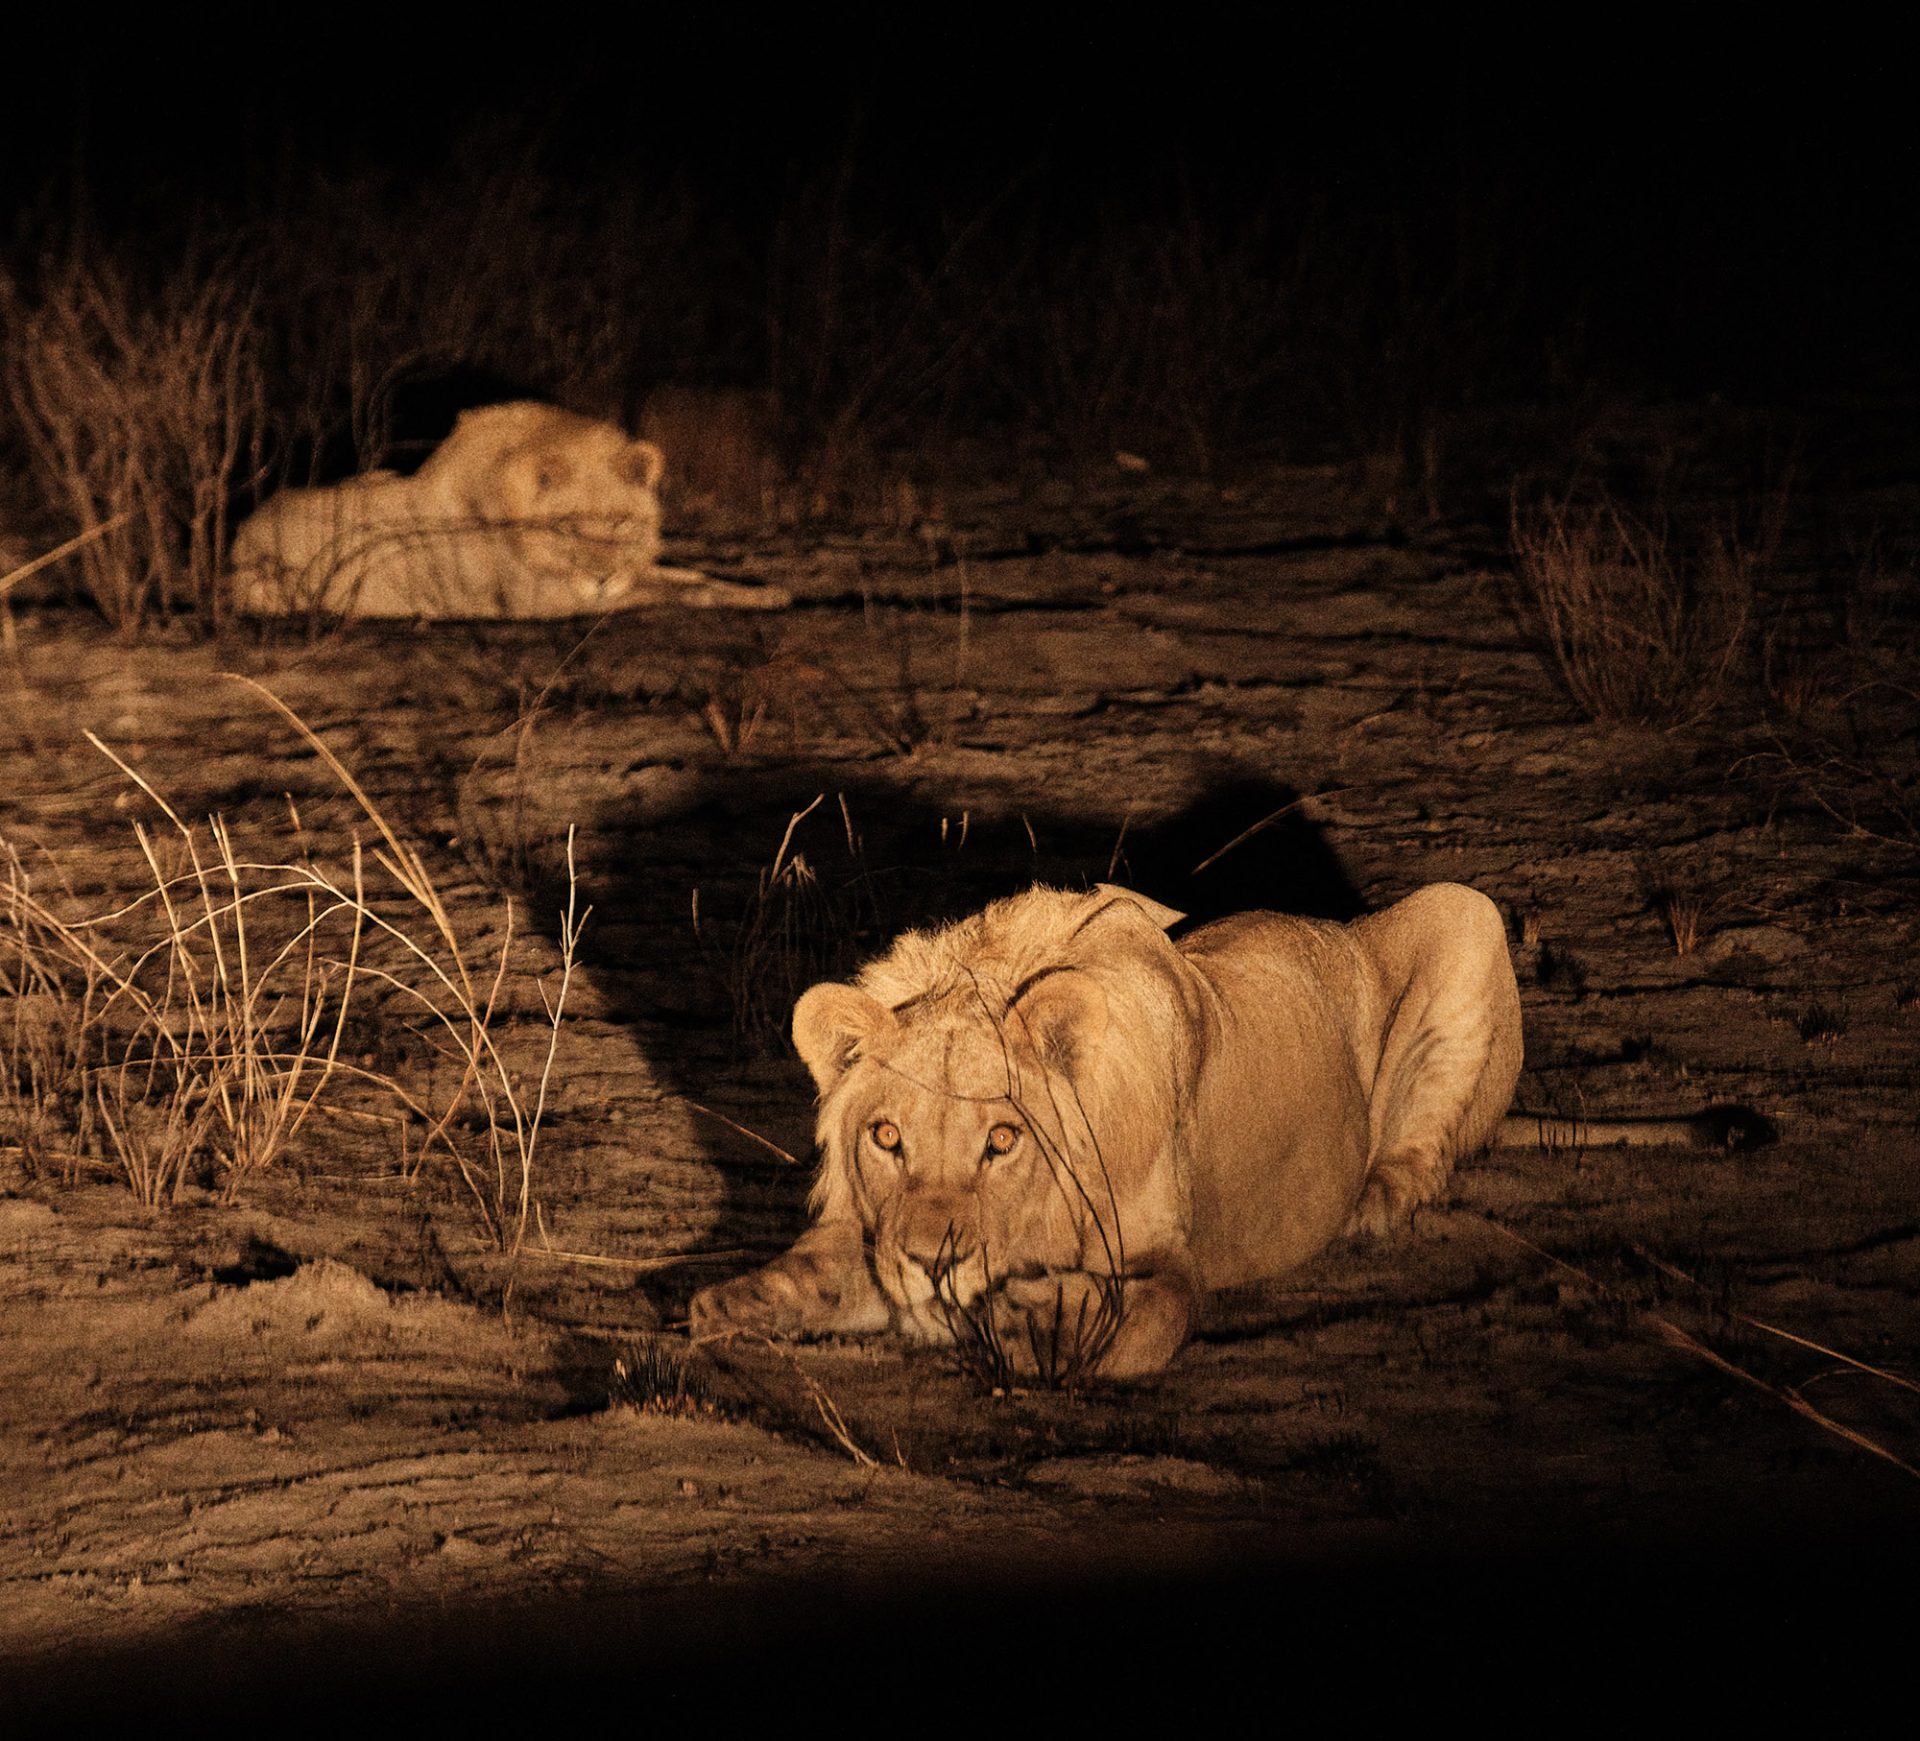 A pair of lions at night.